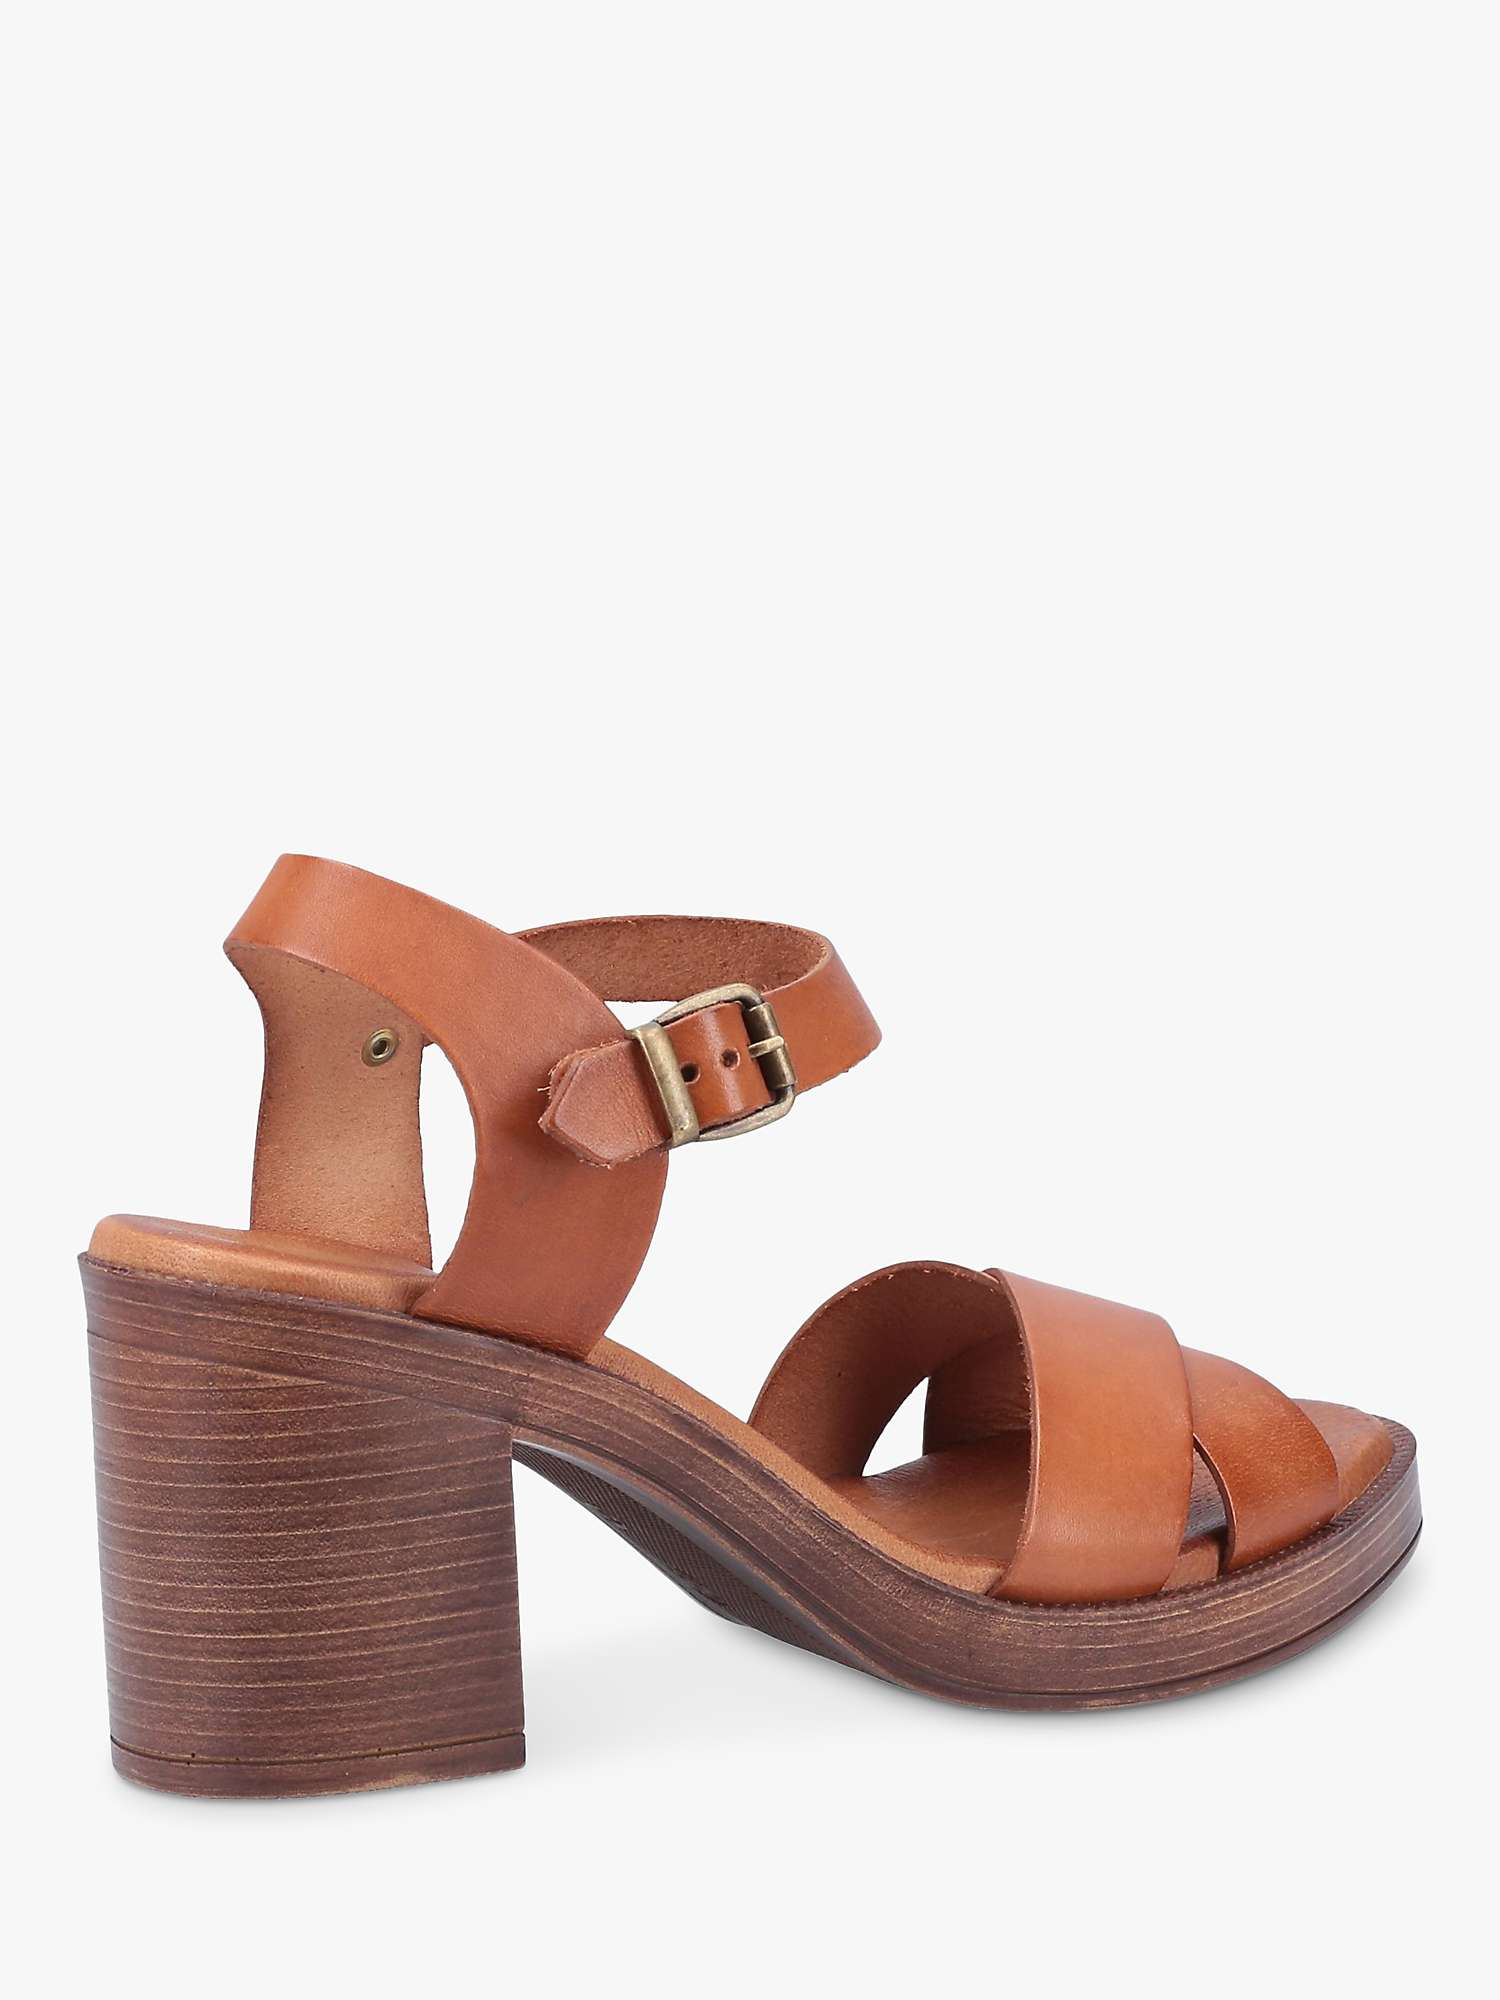 Buy Hush Puppies Georgia Leather Buckle Sandal Online at johnlewis.com